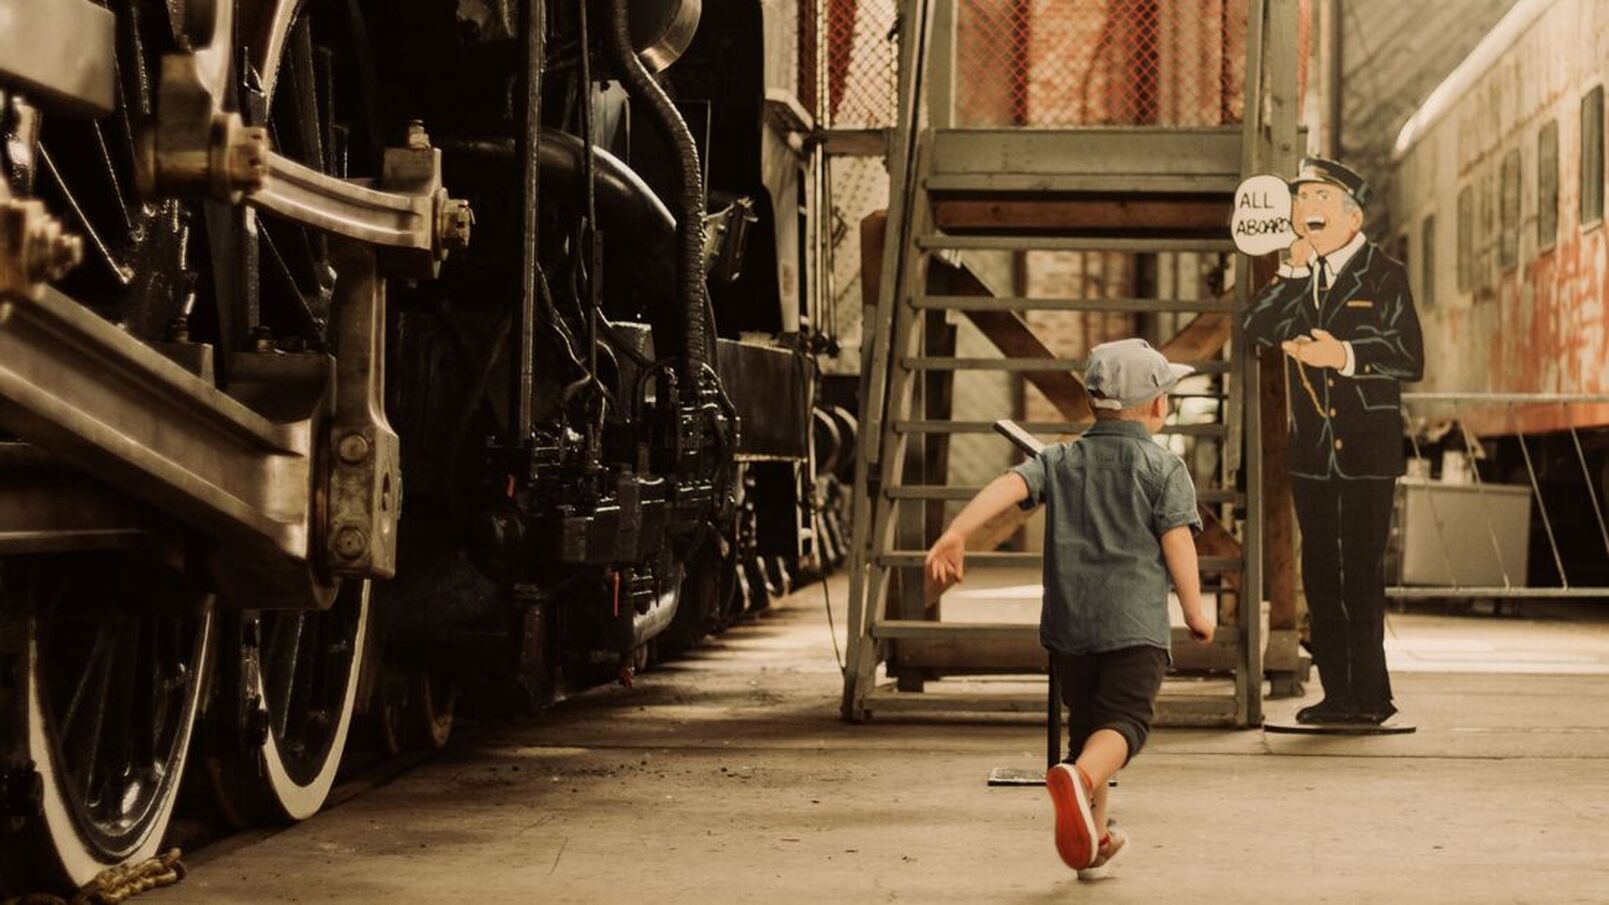 Here is a little boy exploring the Elgin County Railway Museum. The little boy is running toward the paper cut out of a caption calling 